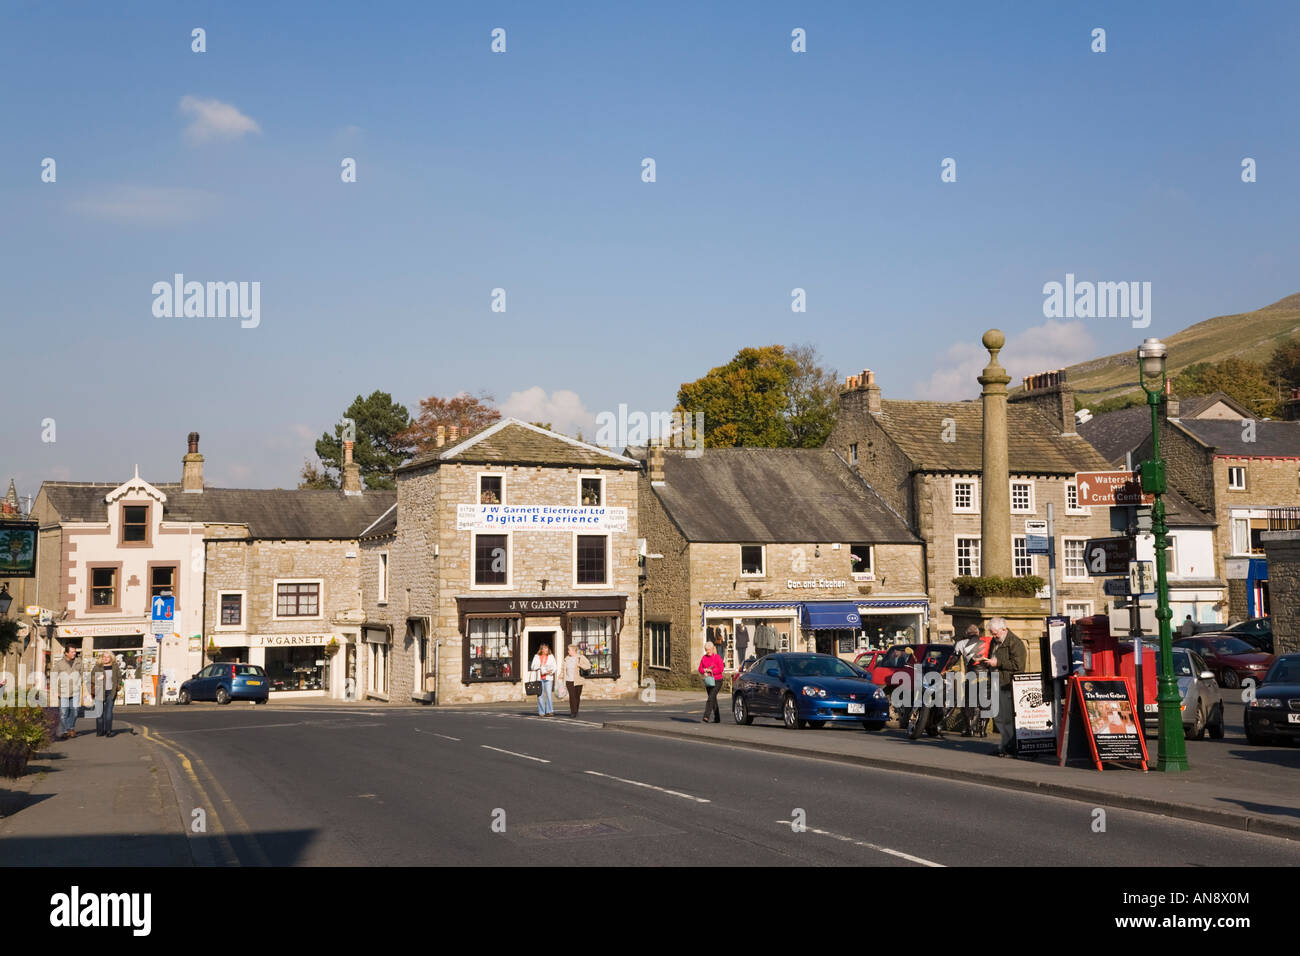 Traditional limestone buildings in historic town centre in 'Market Place' Settle Yorkshire England UK Stock Photo